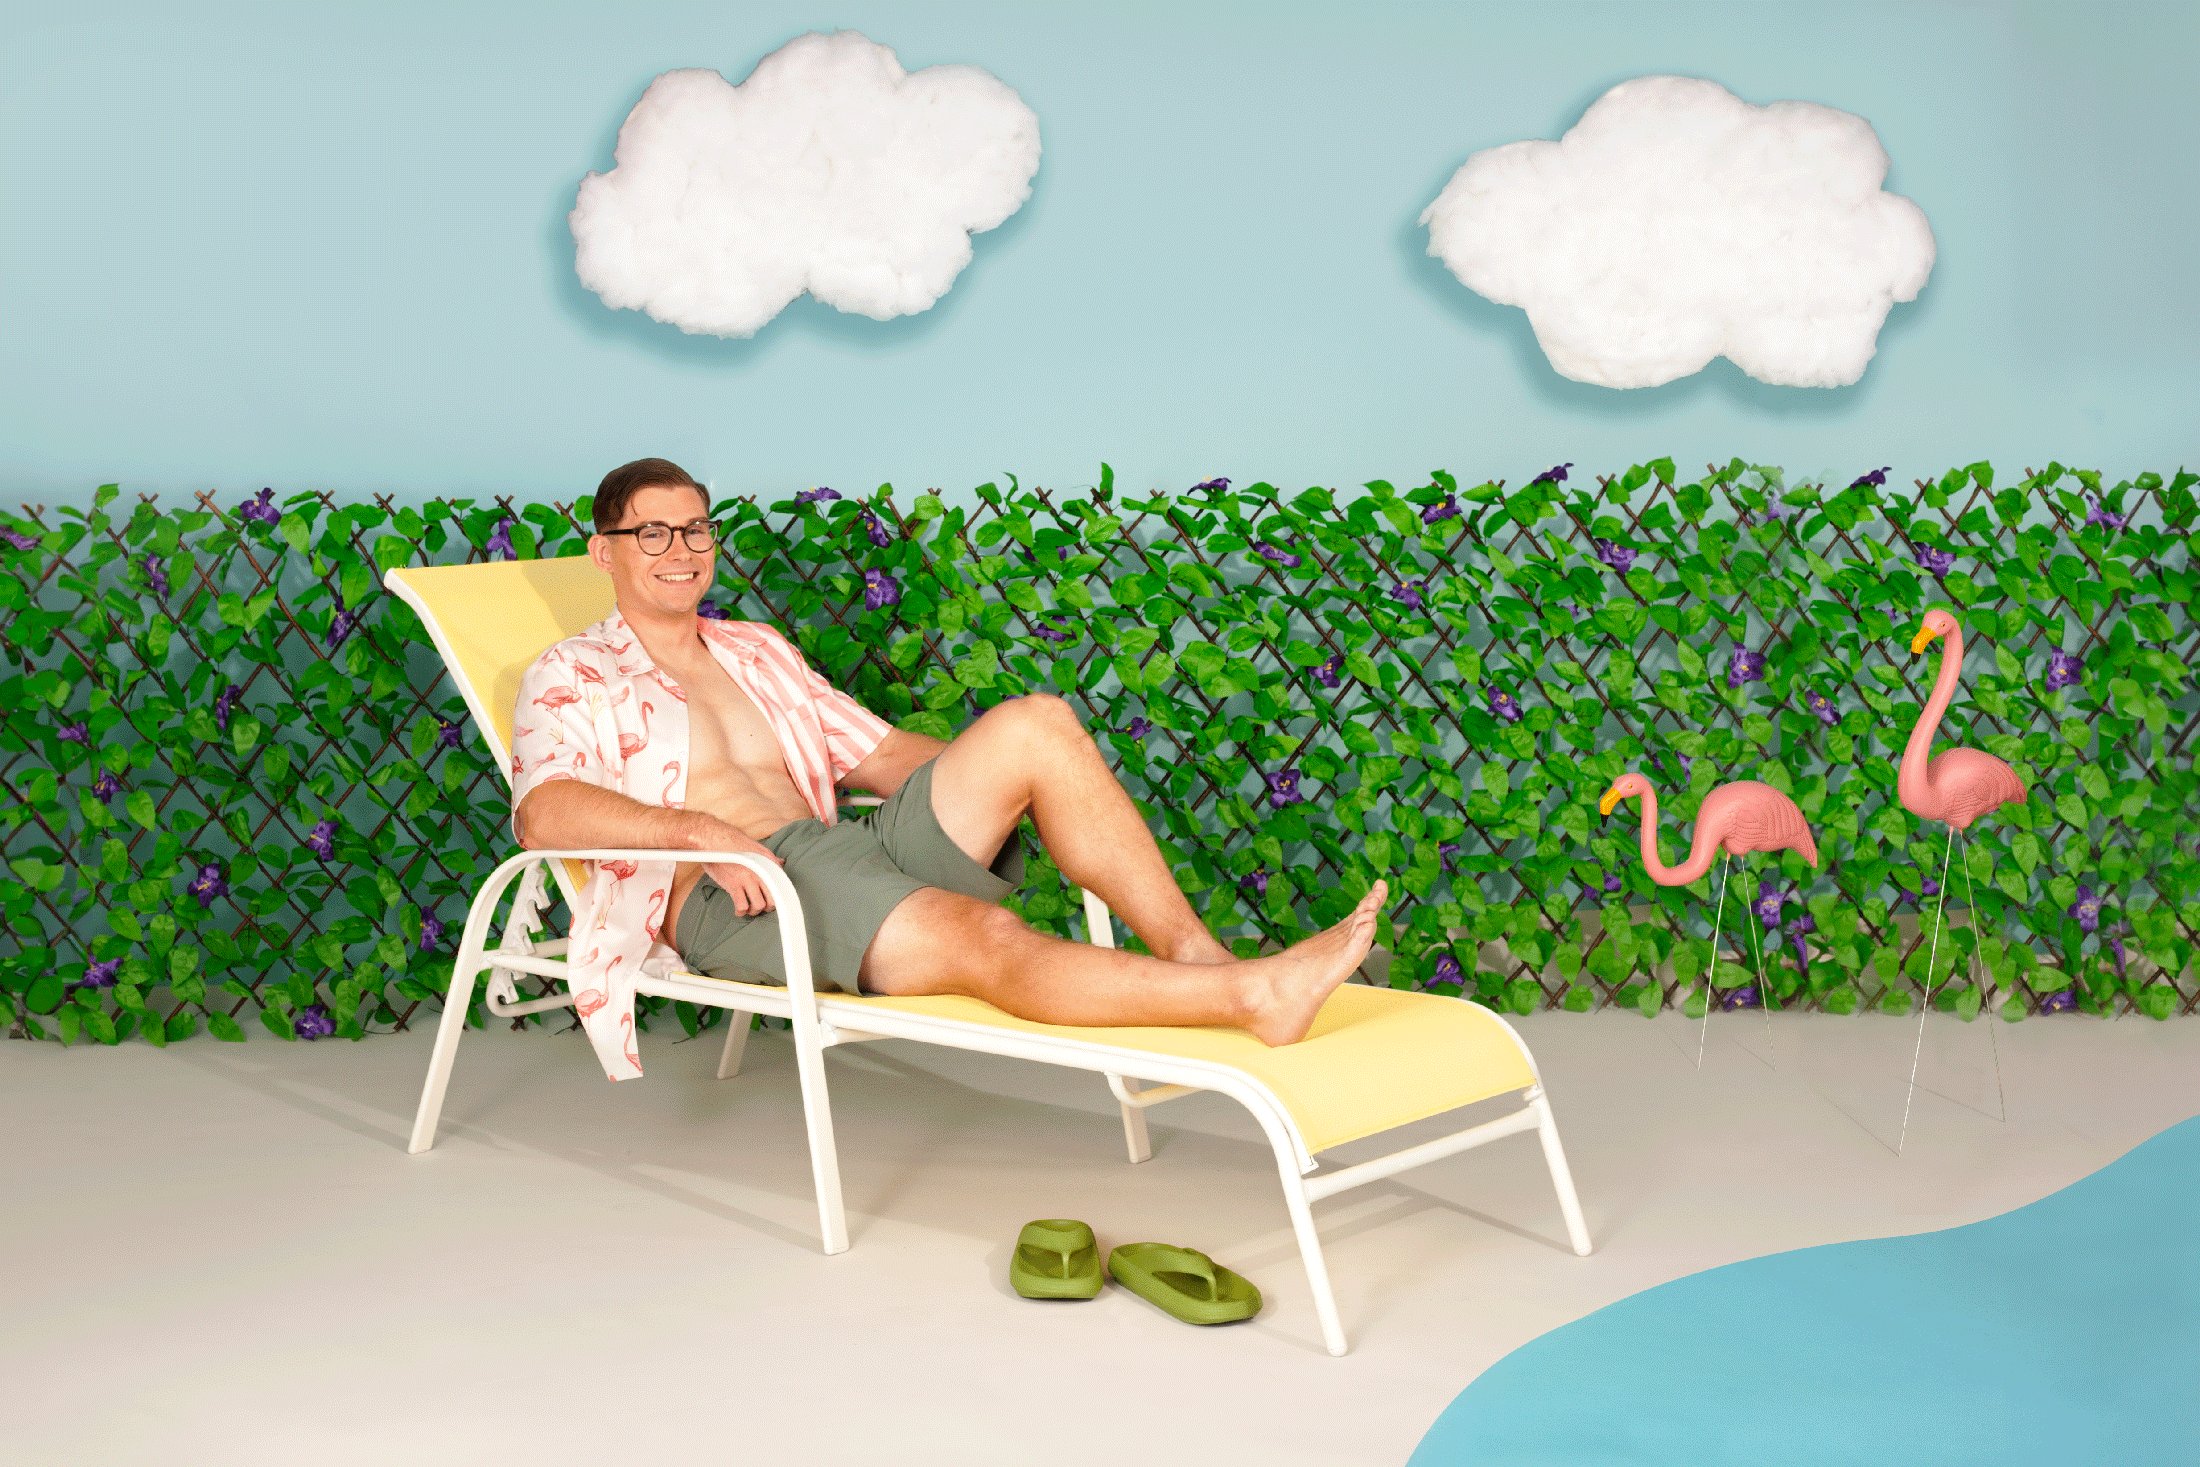 A man reclining on a lounge chair, smiling and relaxed in a staged summery setting with faux grass, a hibiscus-patterned shirt, and flamingo ornaments.